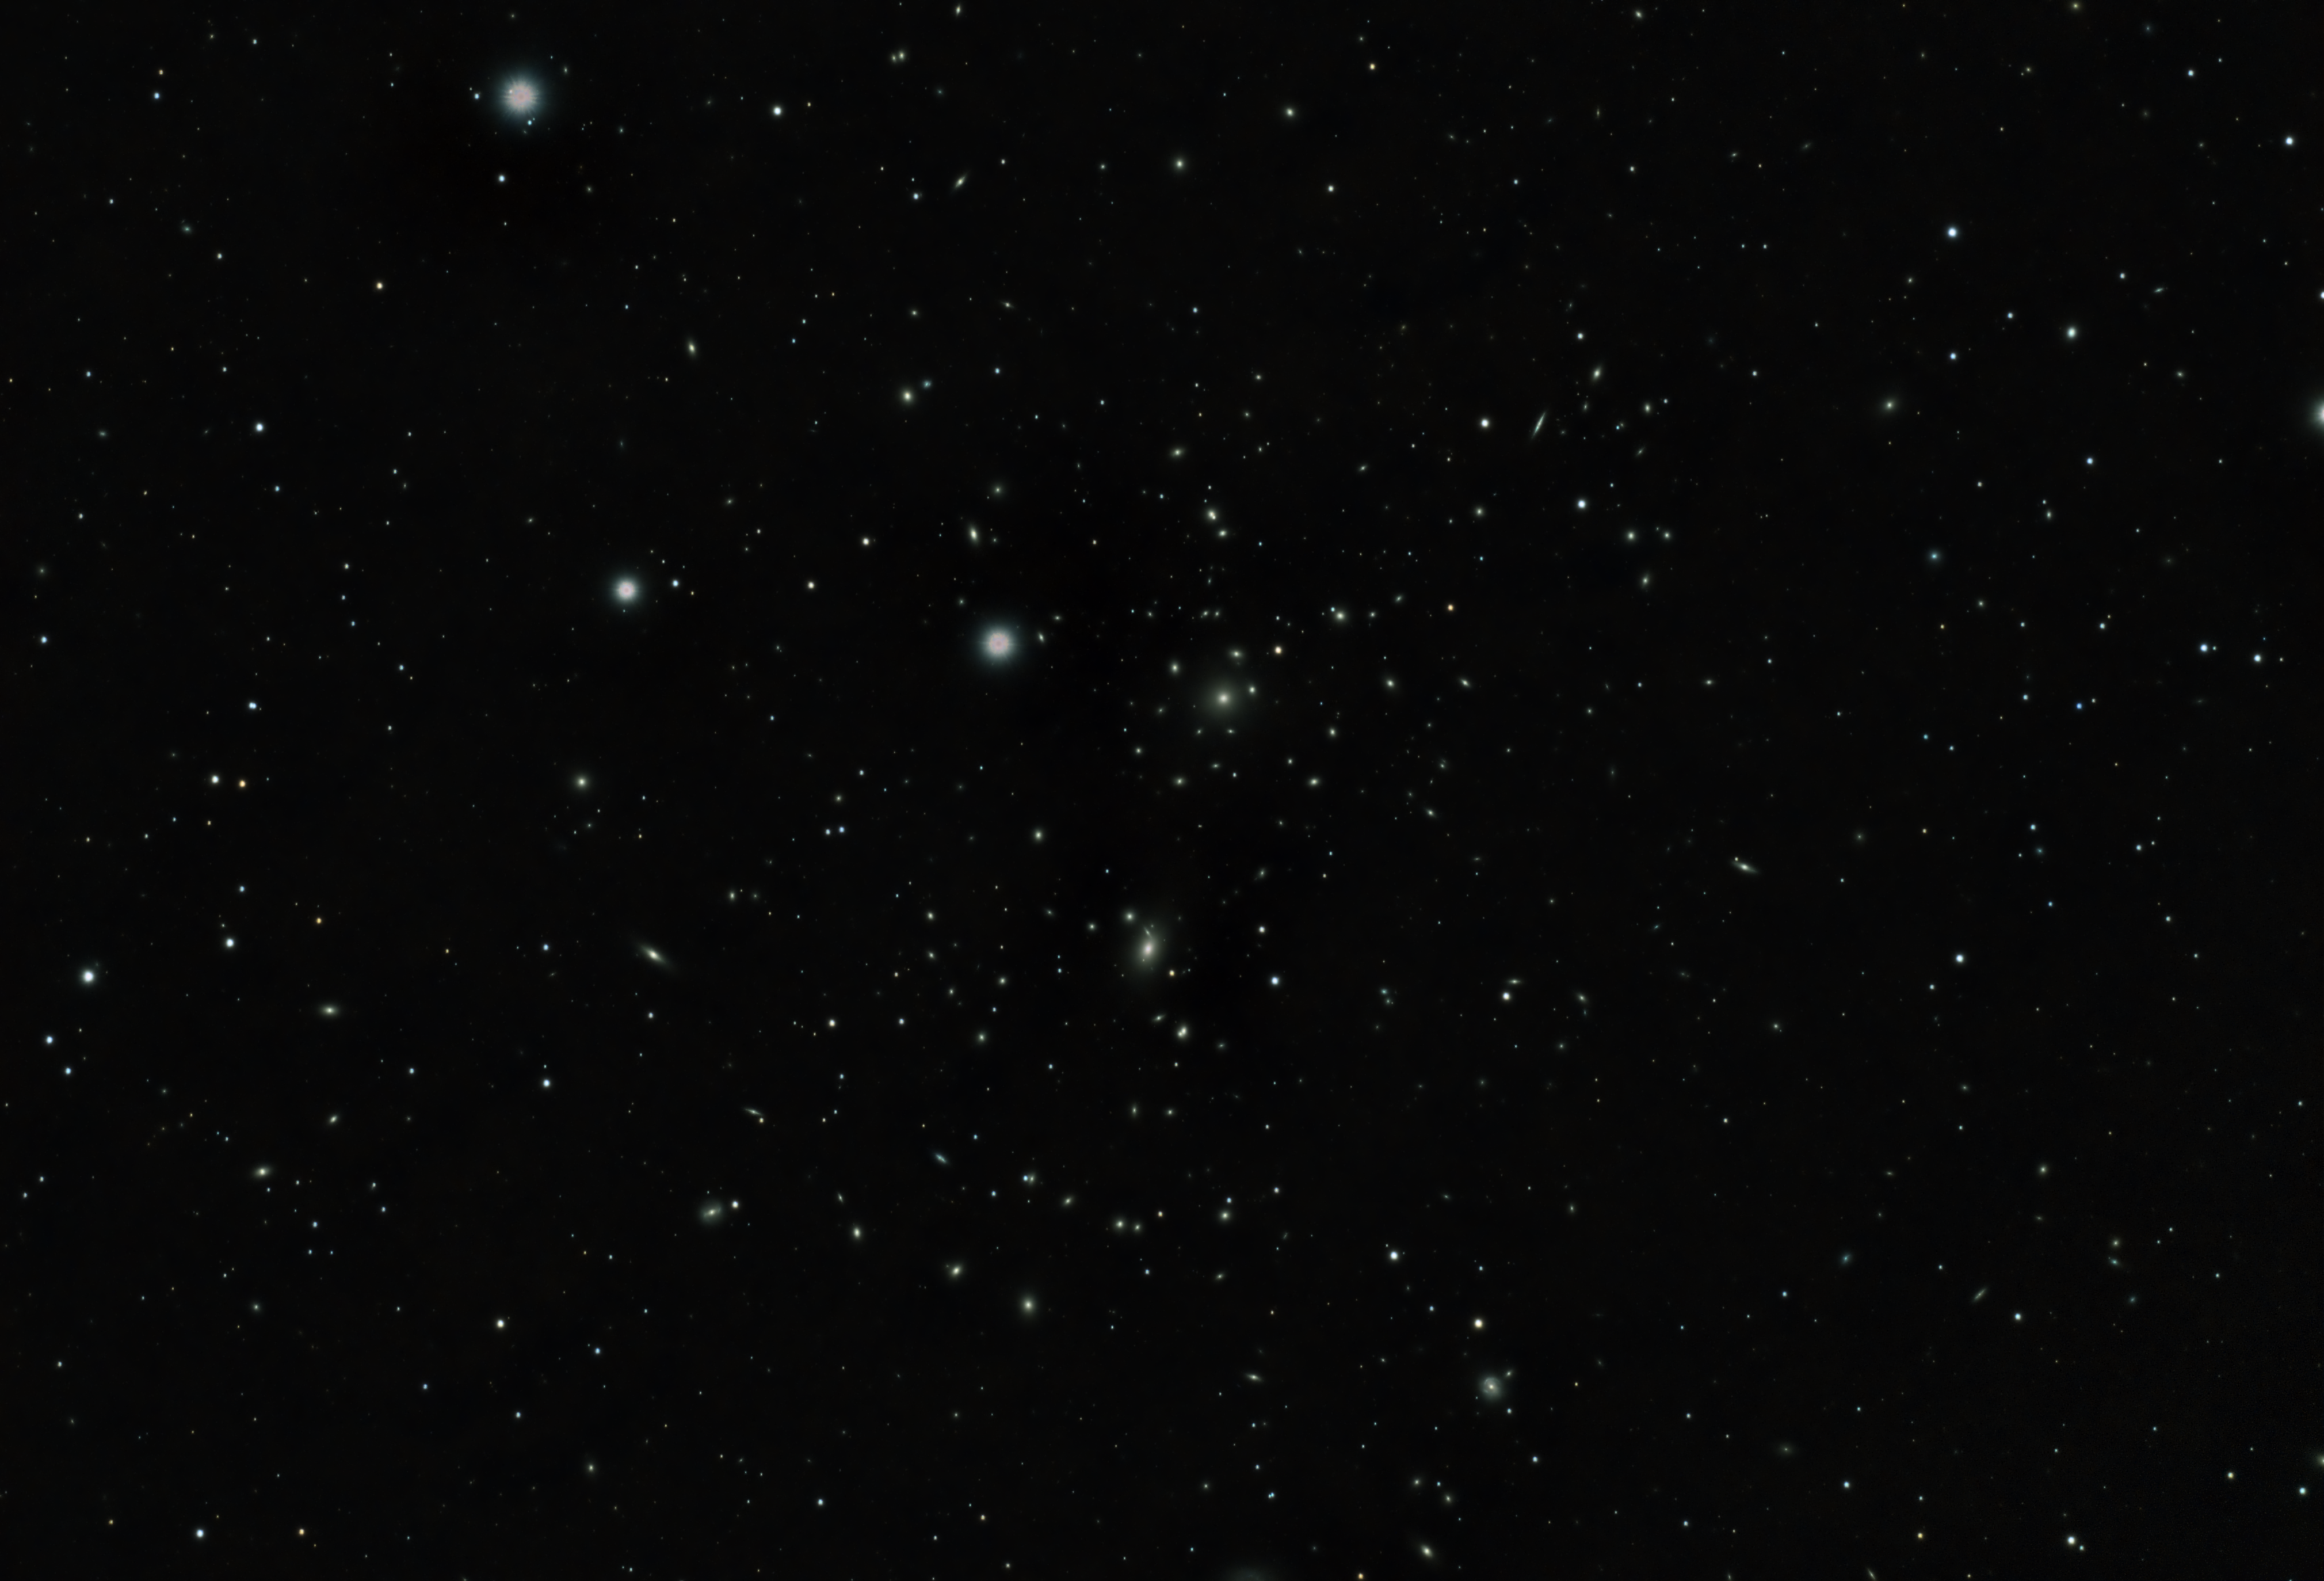 Abell 1656 in Coma Berenices